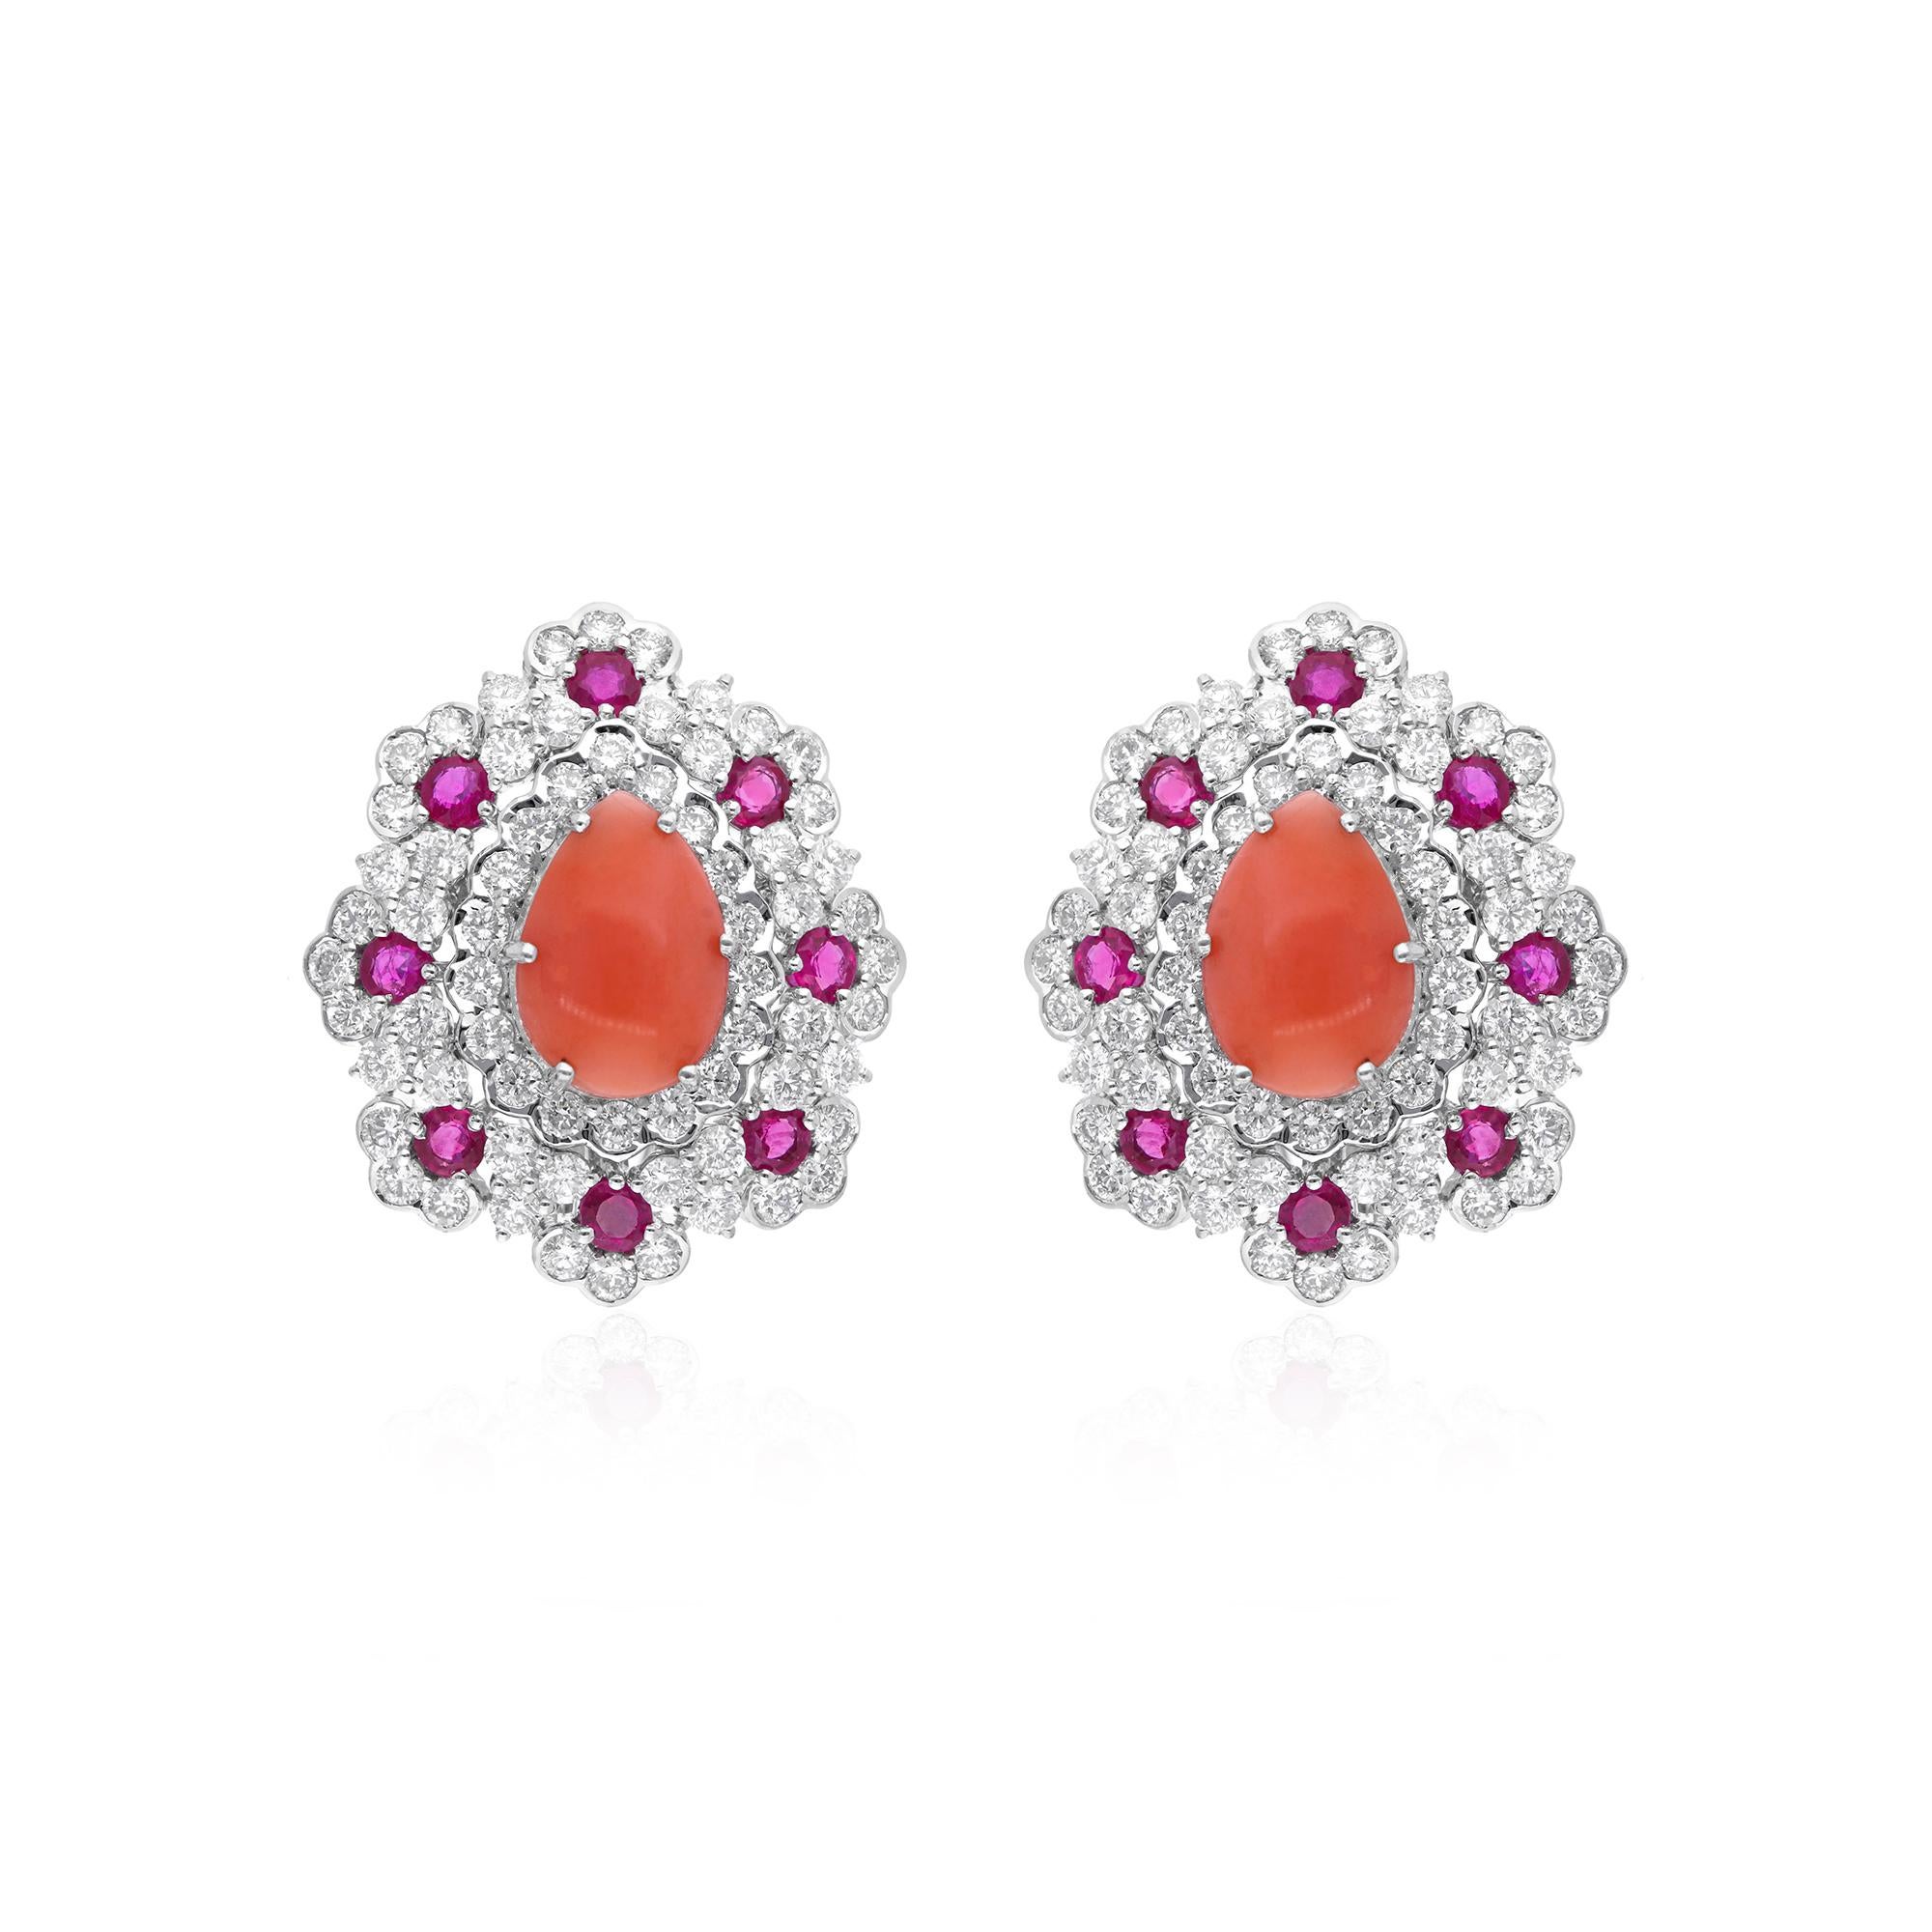 Set in the finest 18 karat white gold, these studs are a testament to luxury craftsmanship. The brilliance of the coral gemstones is accentuated by the surrounding array of dazzling rubies and diamonds. Each precious stone is carefully selected and